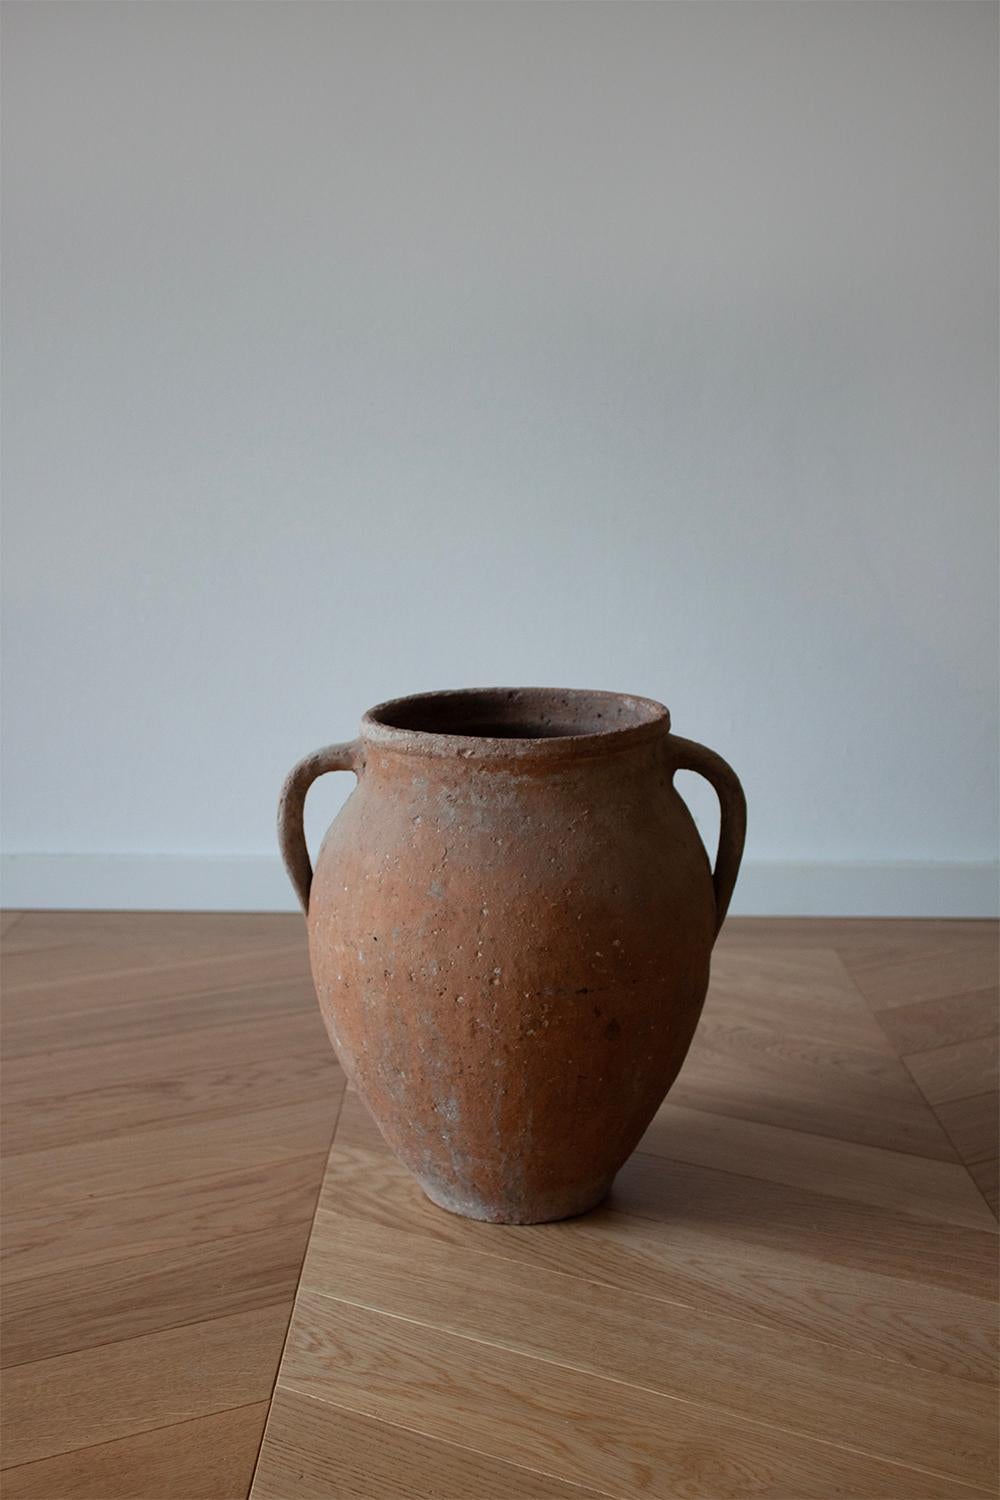 This pot has its origin in the area between Greece and Turkey and is a percent representation of the traditional meditation aesthetic. This ceramic pot bears witness to a bygone era, capturing the essence of the artisans who skillfully shaped.